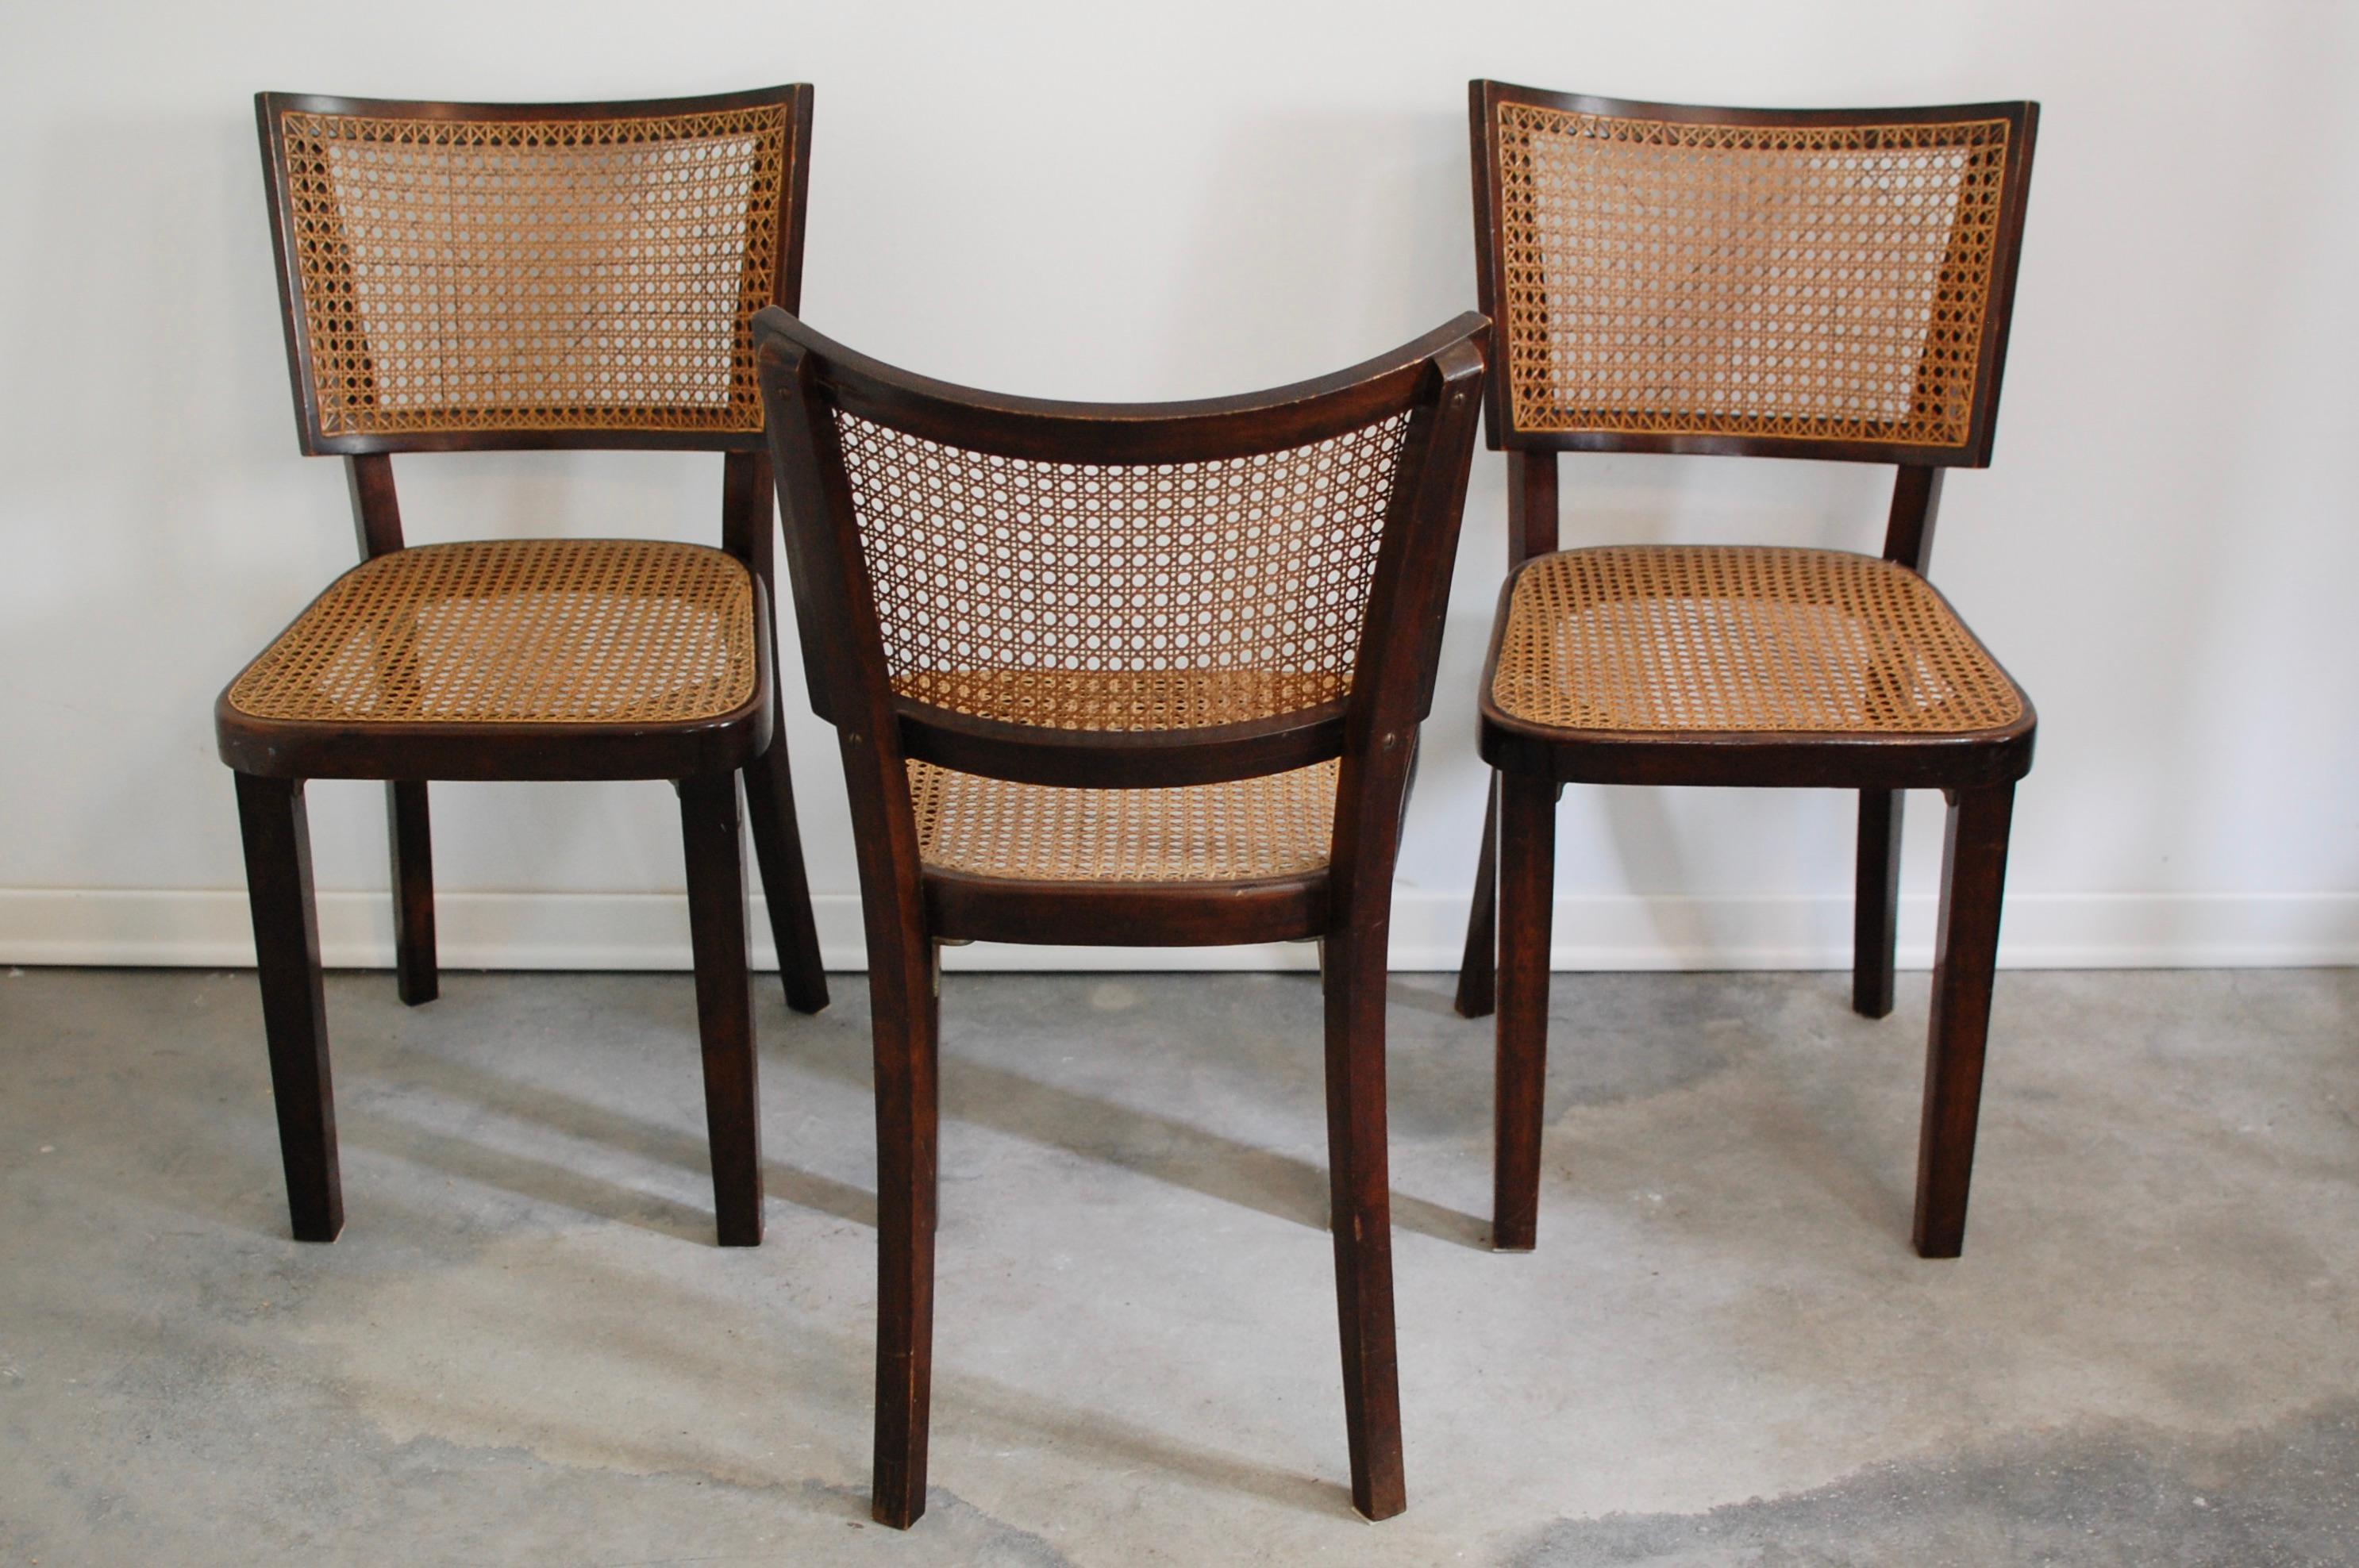 Slovenian Art Deco Dining Chairs, 1920s, Set of 6